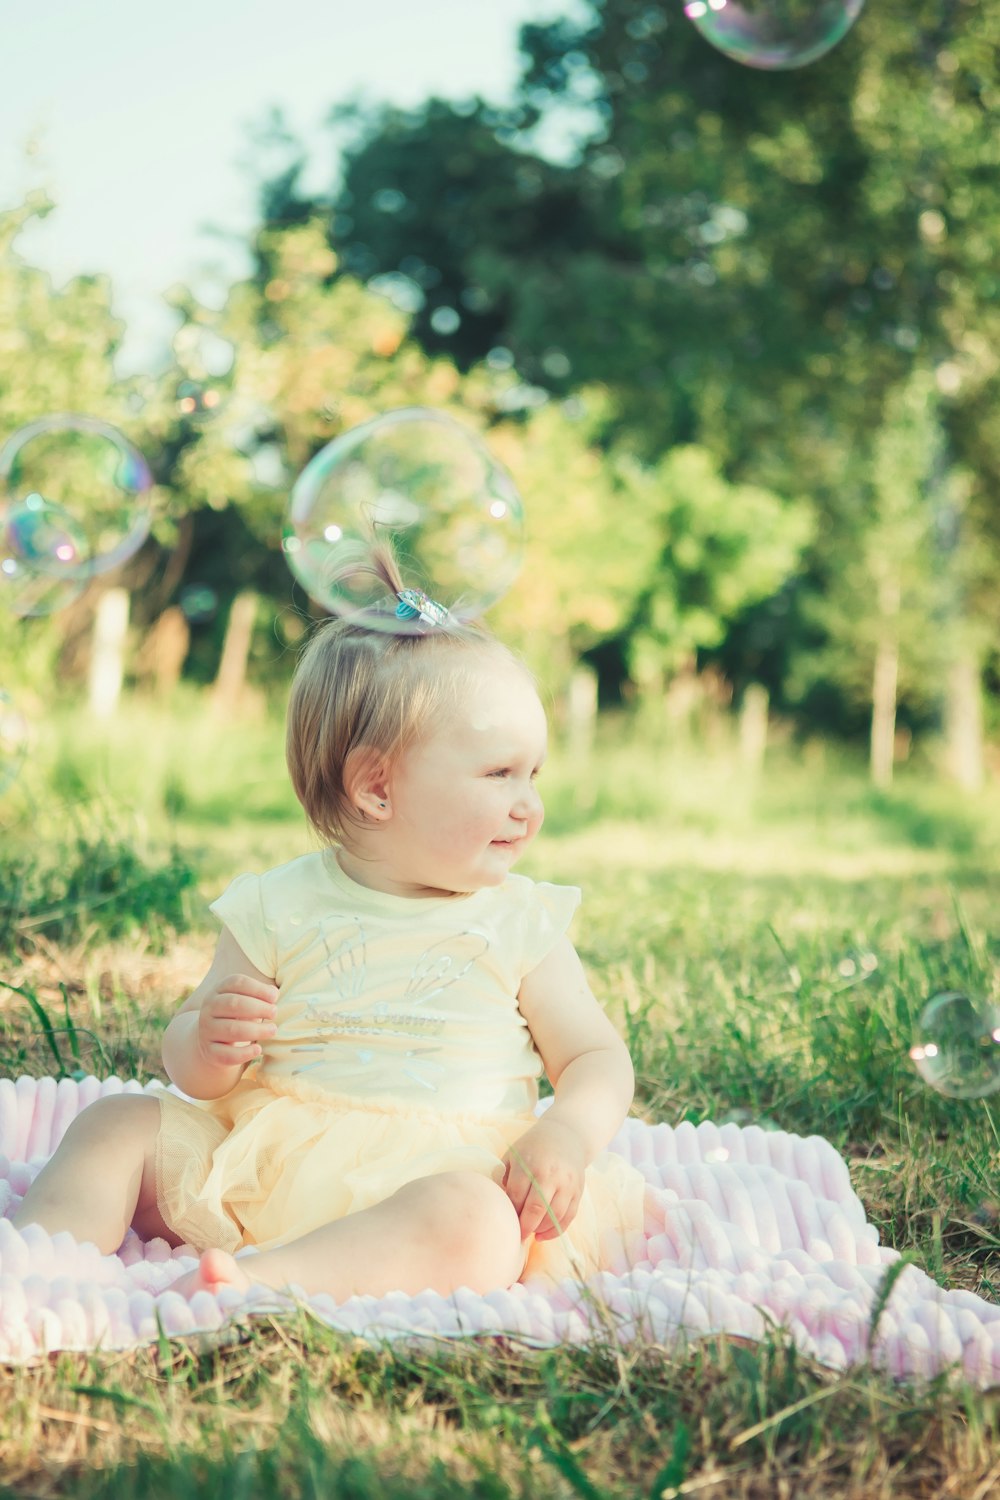 baby in white dress playing with bubbles on green grass field during daytime